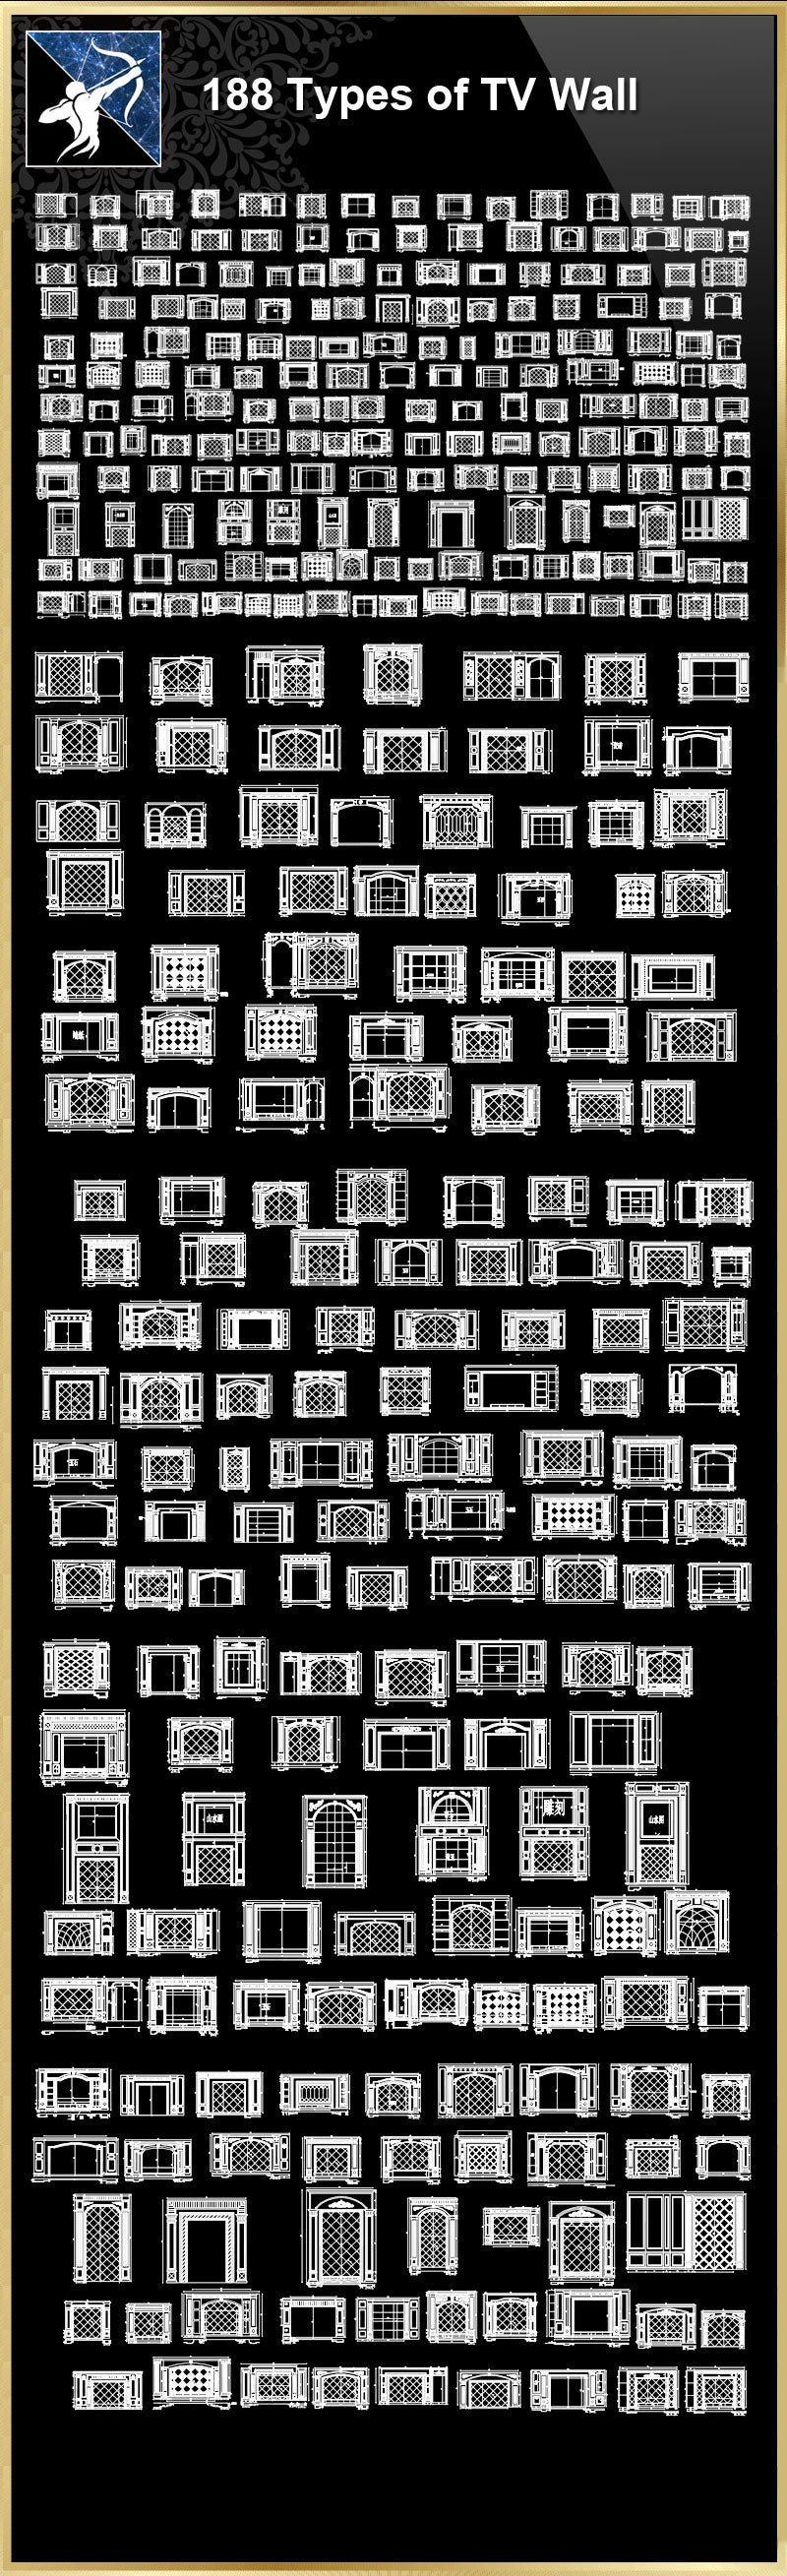 ★【188 Types of TV Wall Design CAD Drawings】